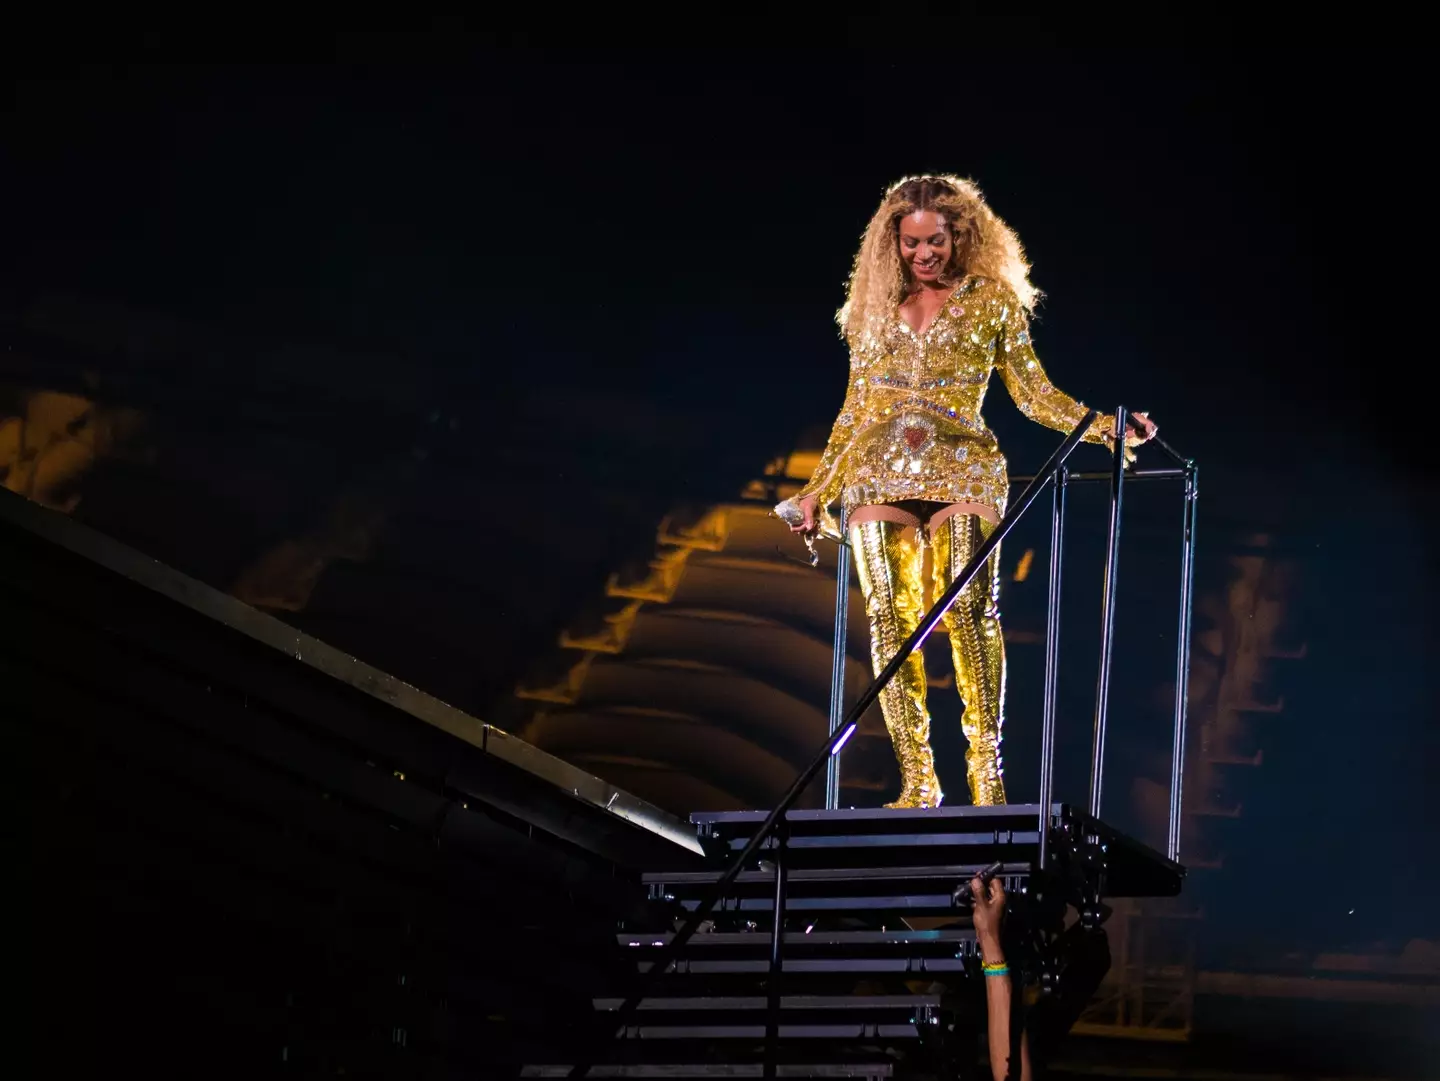 Many Beyonce fans have joked about the star's effect on her fans.